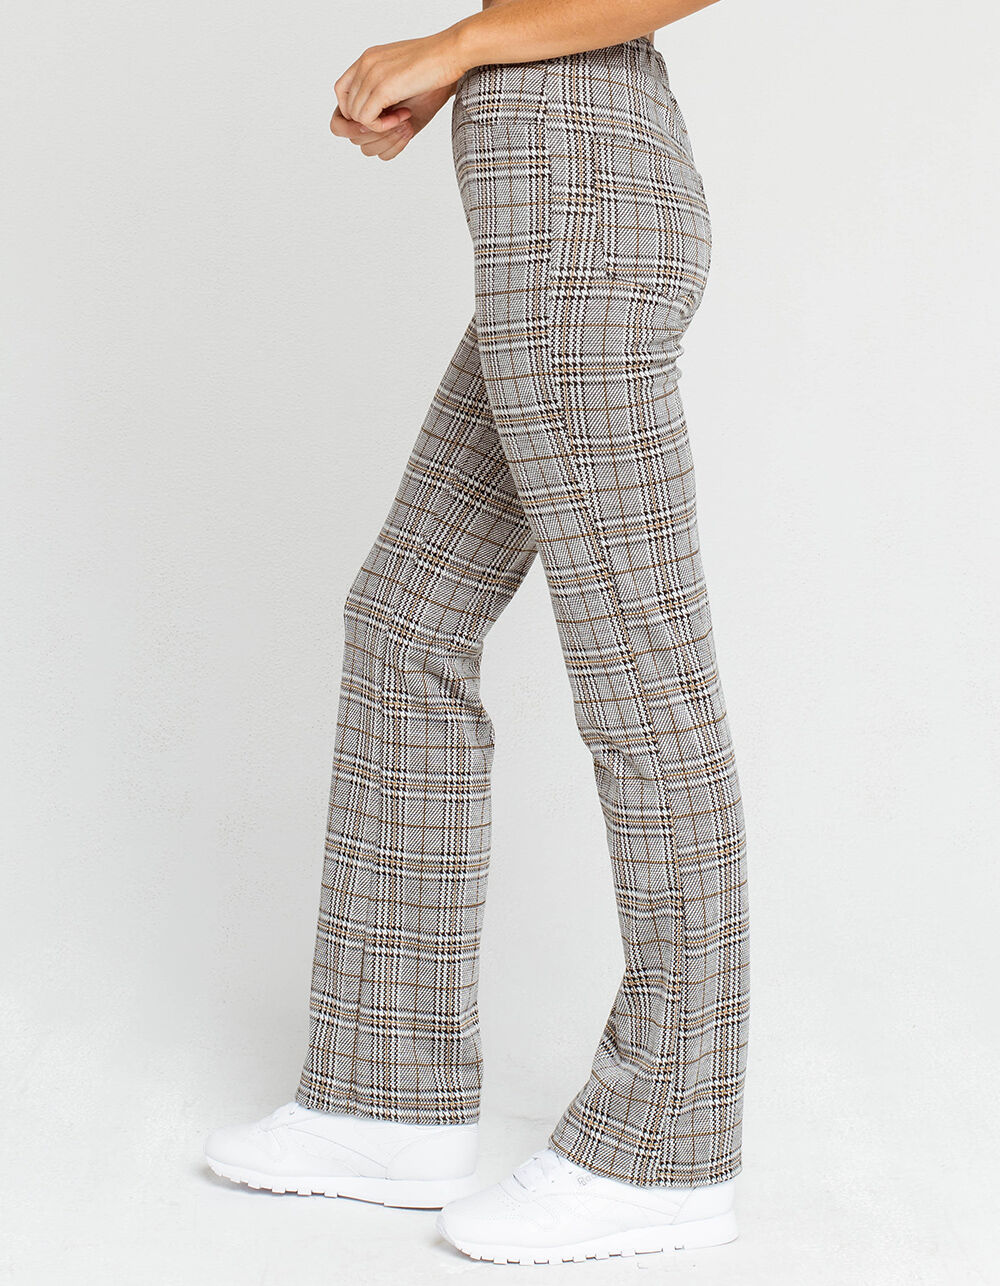 RSQ Plaid Womens Gray Flare Pants - GRAY COMBO | Tillys